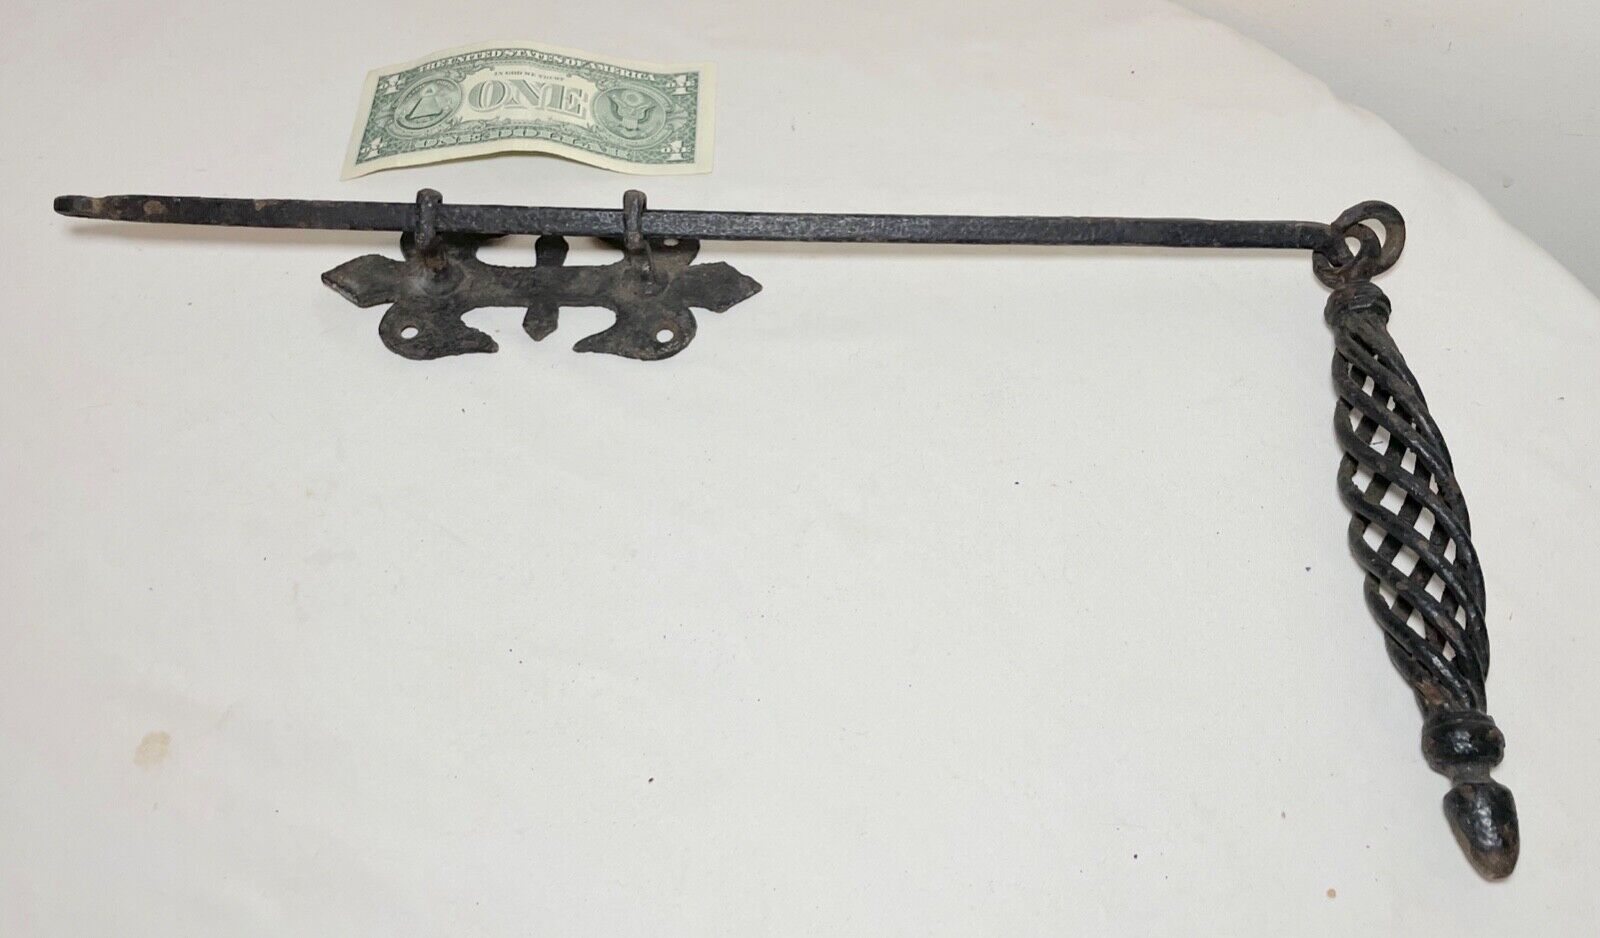 LARGE antique 18th century hand wrought iron firelace flue hook latch handle